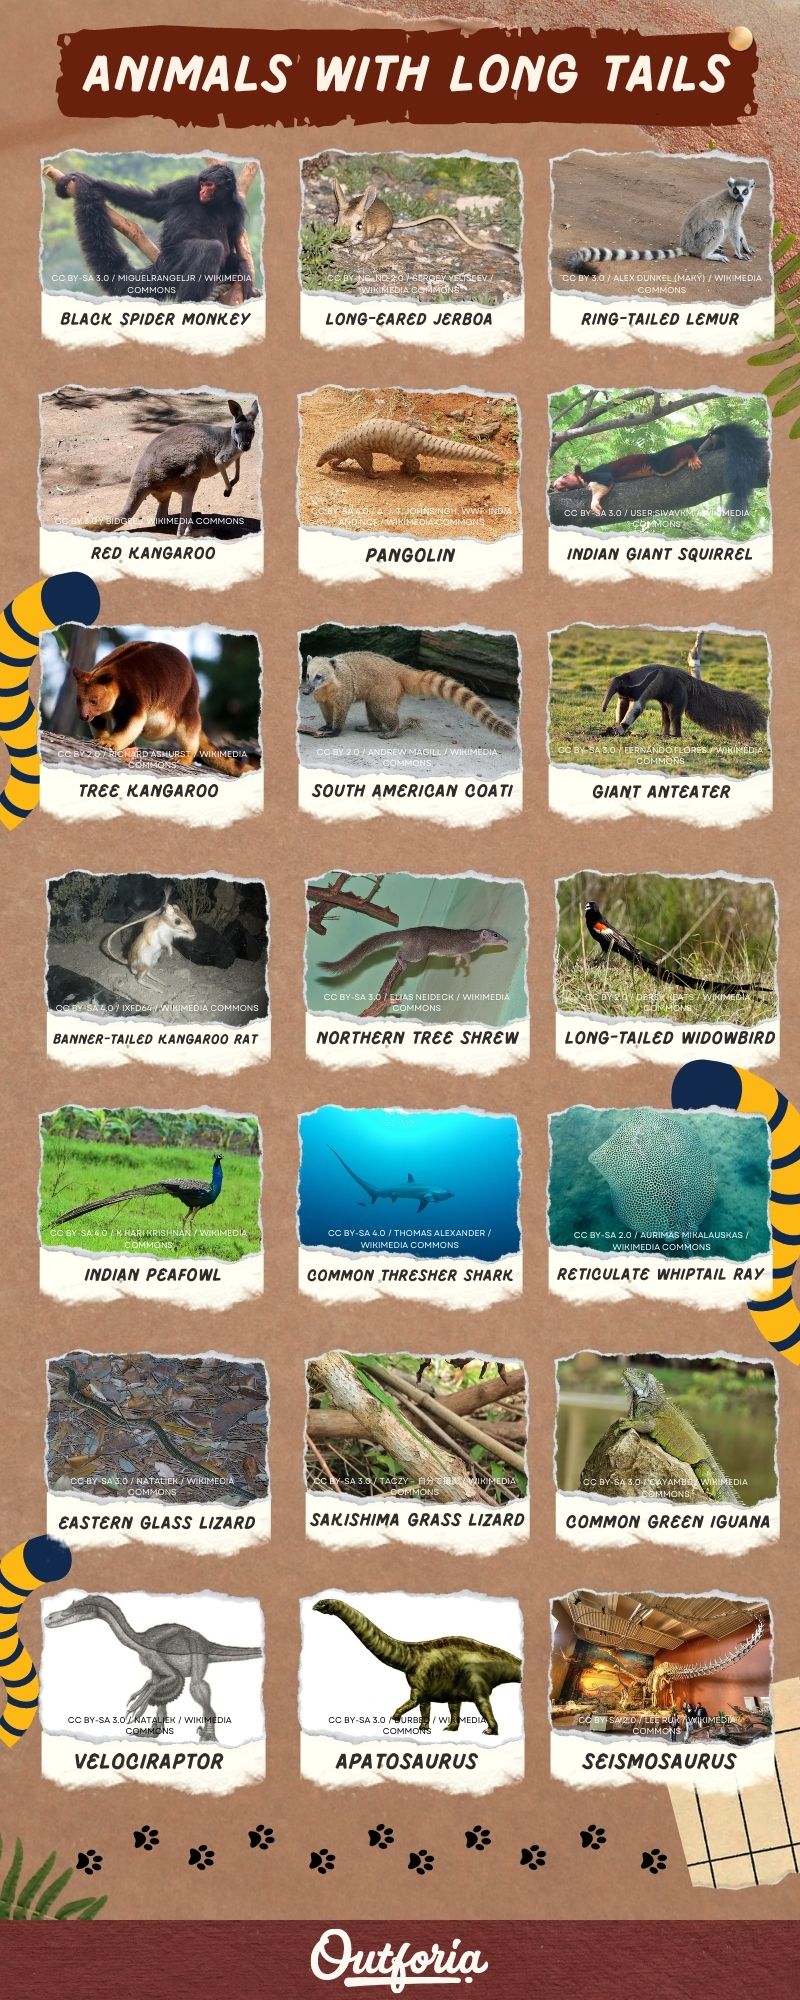 Chart of 21 animal species with long tails